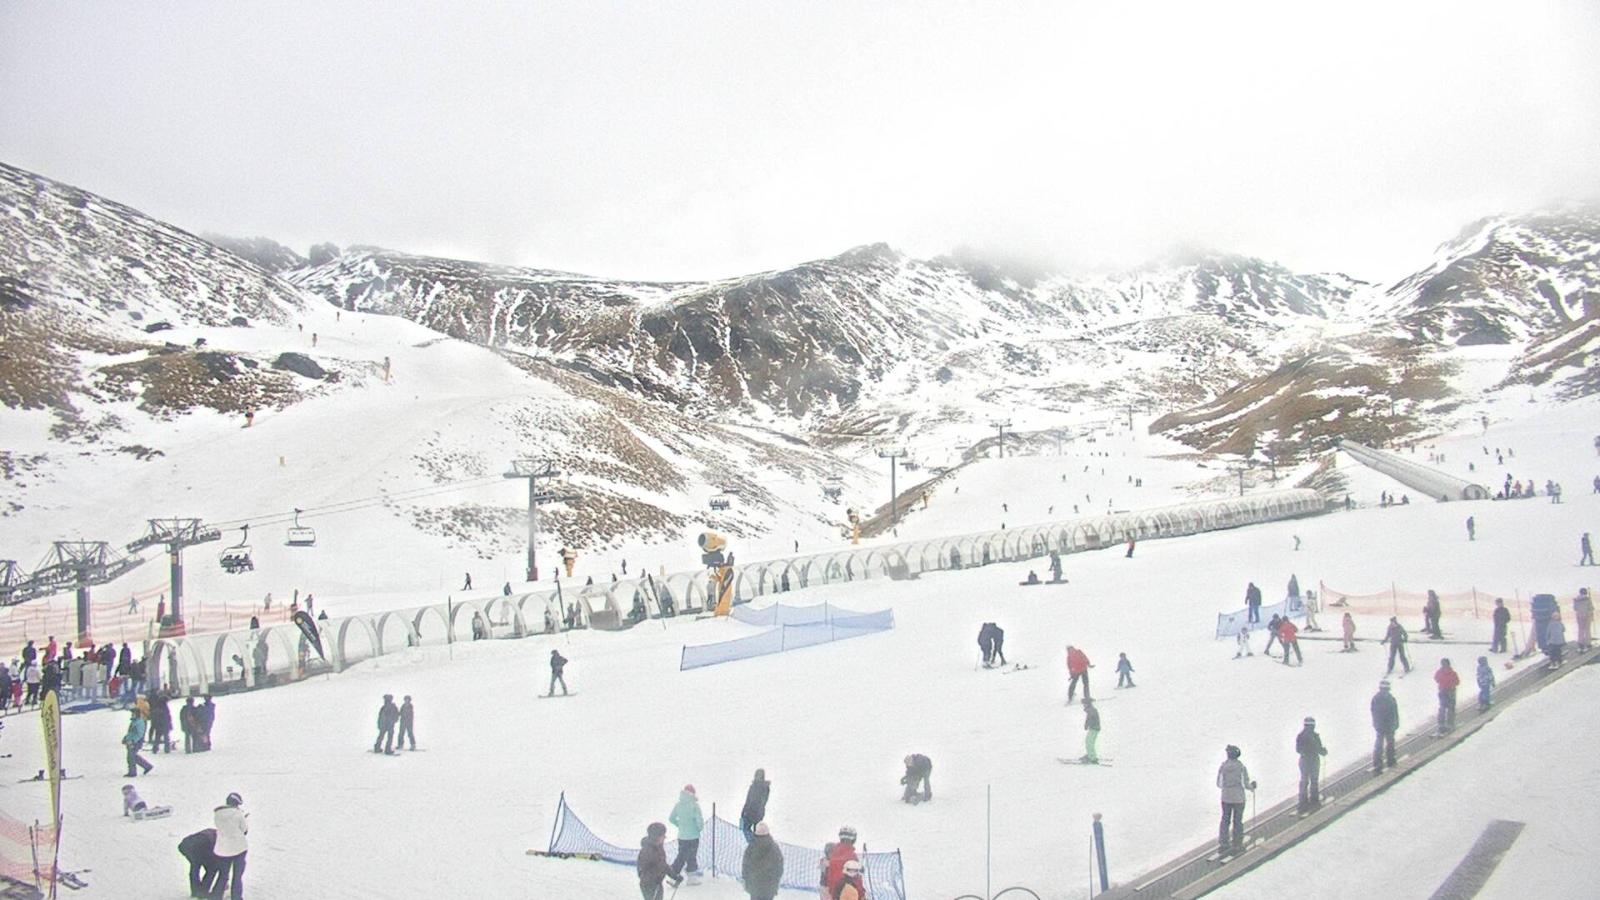 Webcam The Remarkables: Sugar bowl from base